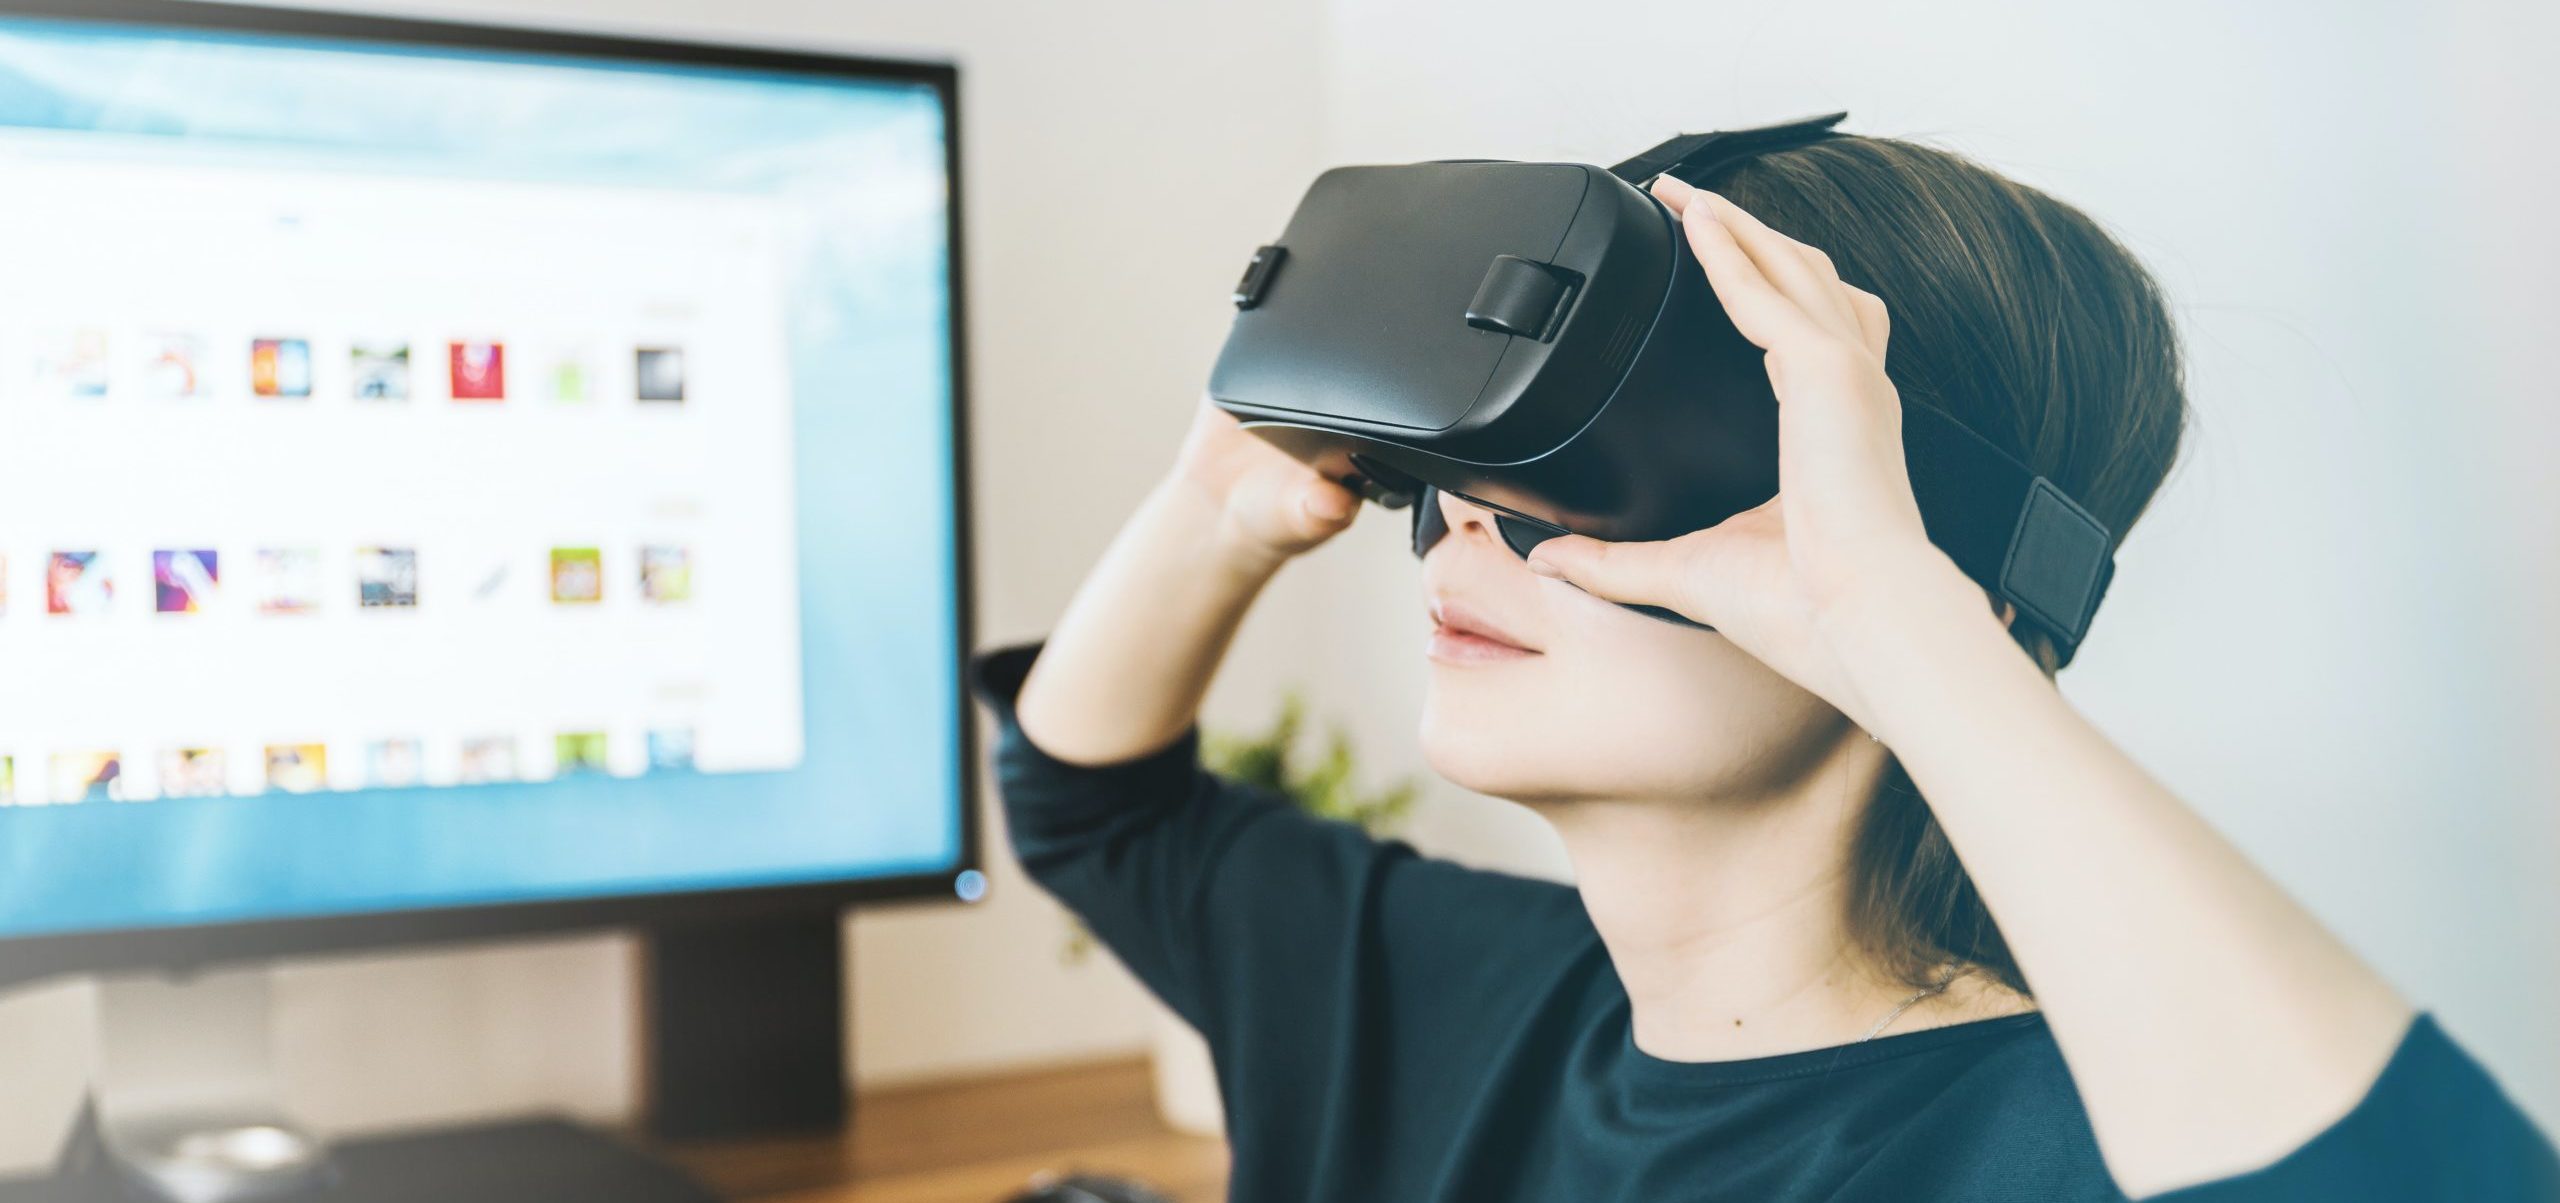 VR computer based learning